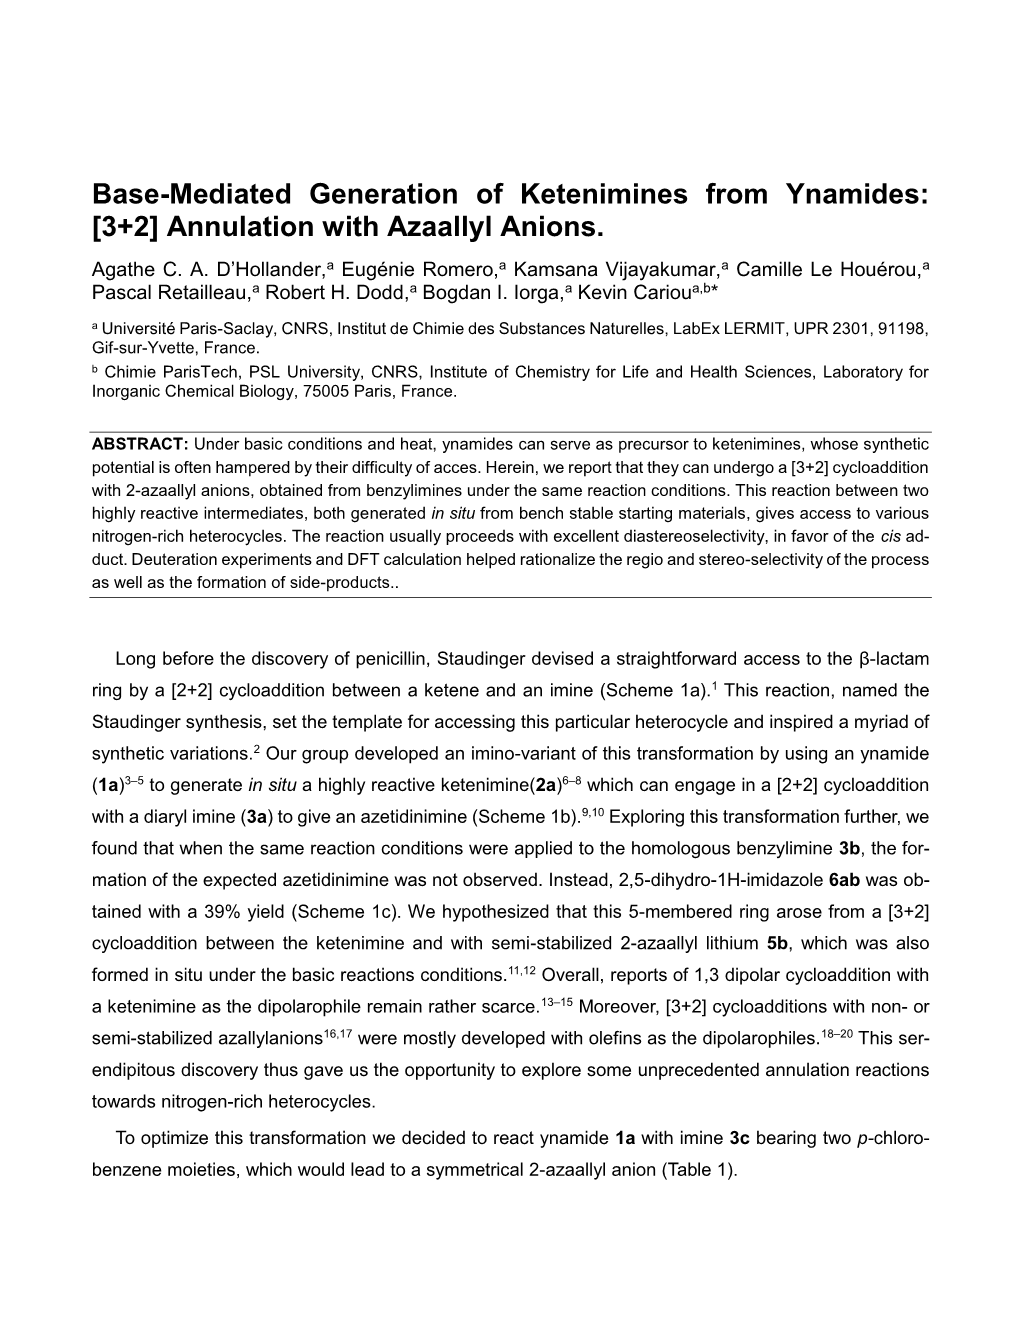 Base-Mediated Generation of Ketenimines from Ynamides: [3+2] Annulation with Azaallyl Anions